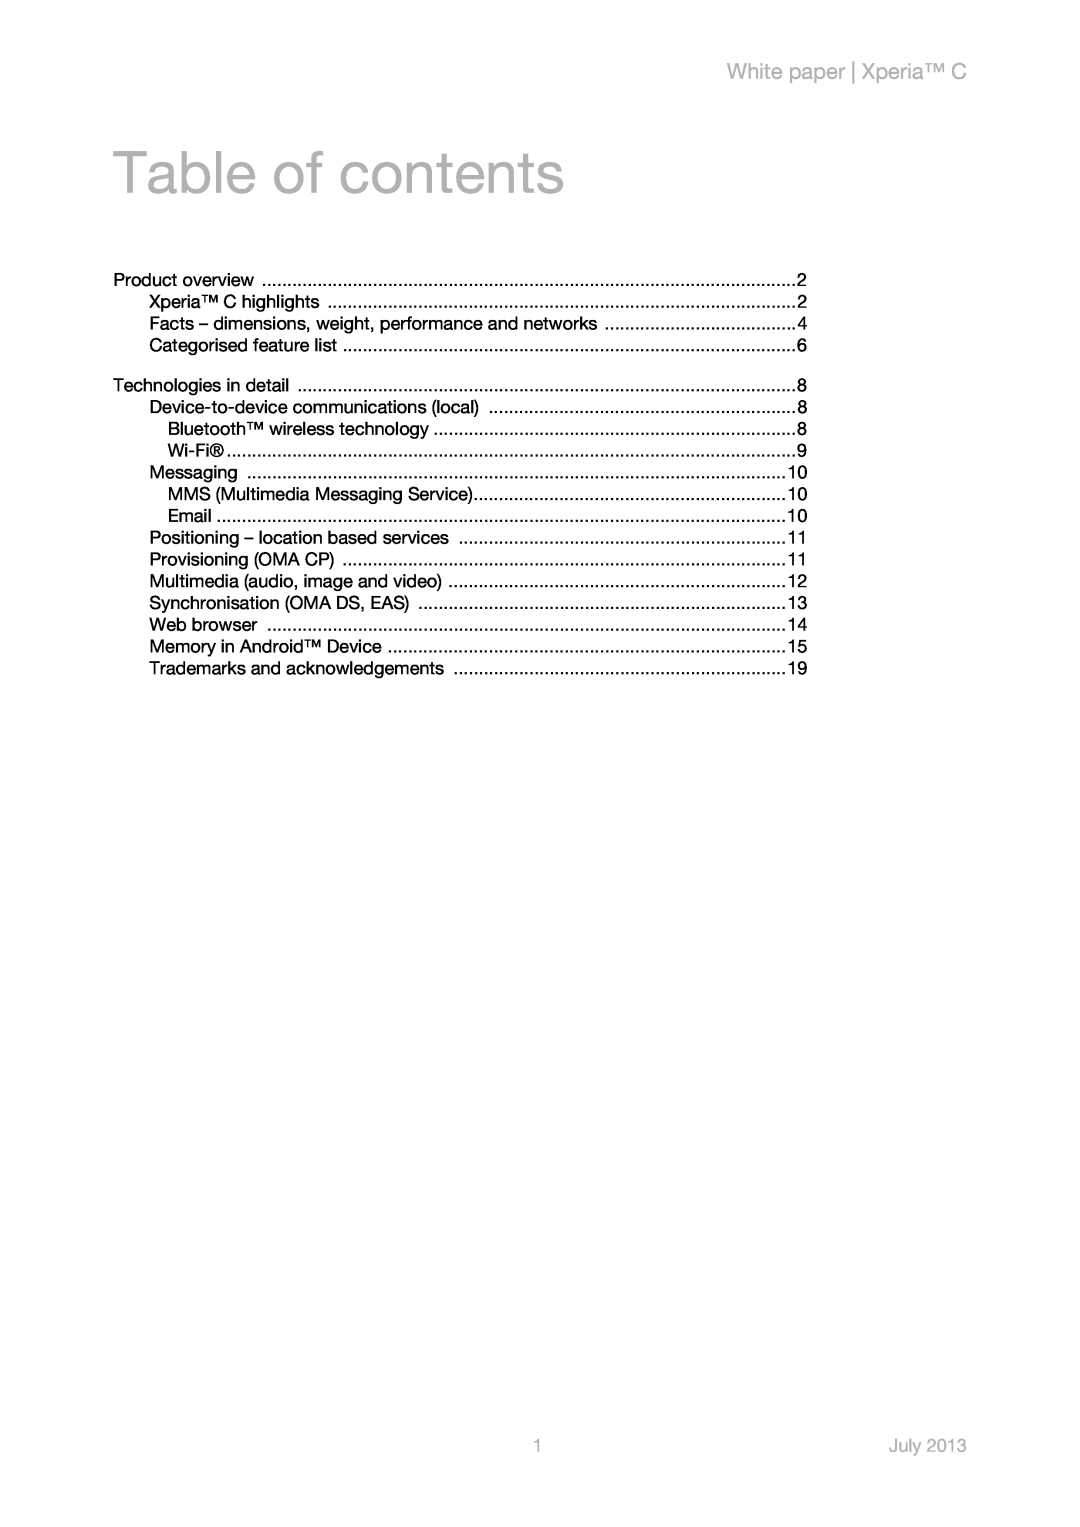 Sony s39h manual Table of contents, White paper Xperia C, July 